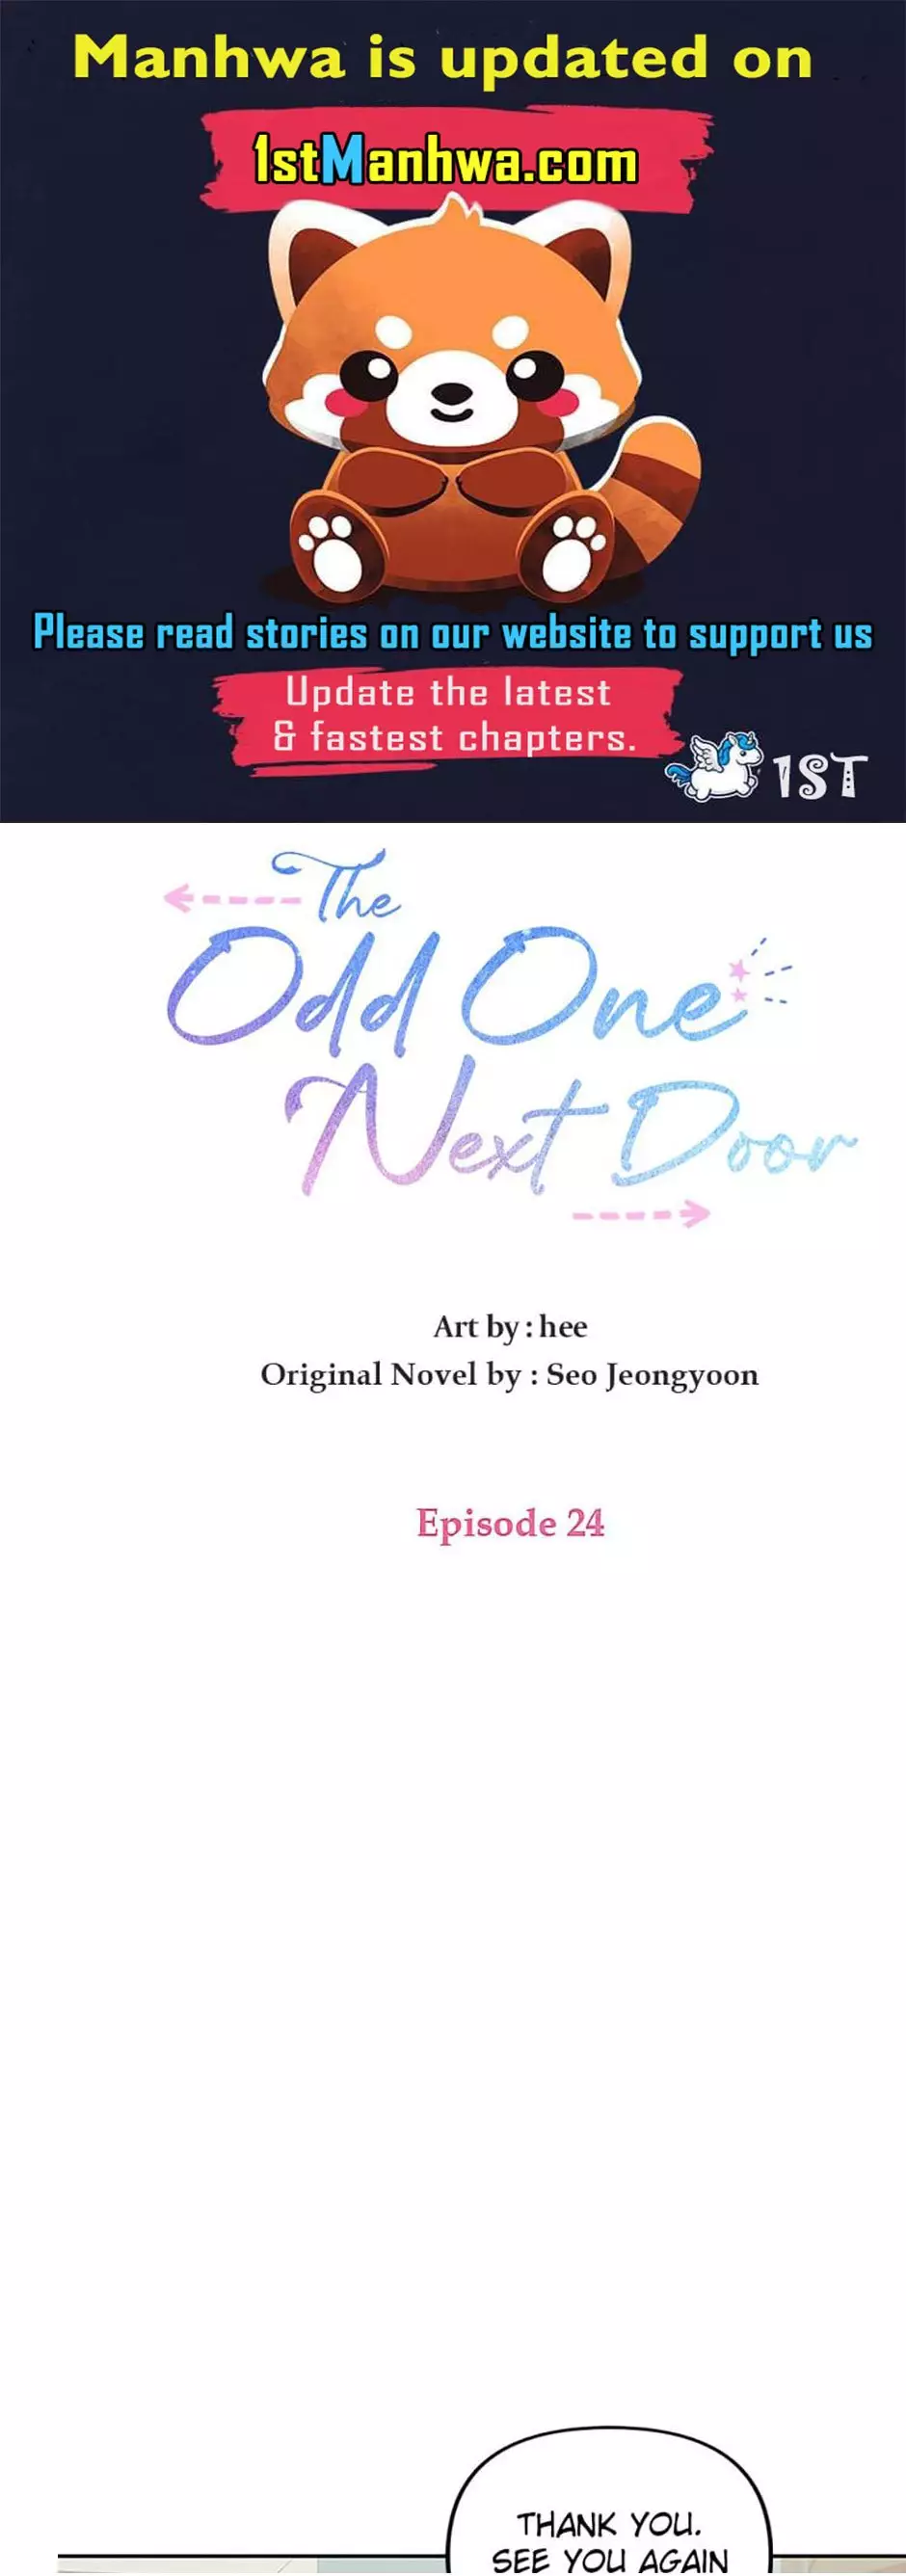 The Odd One Next Door - 24 page 1-9325603f